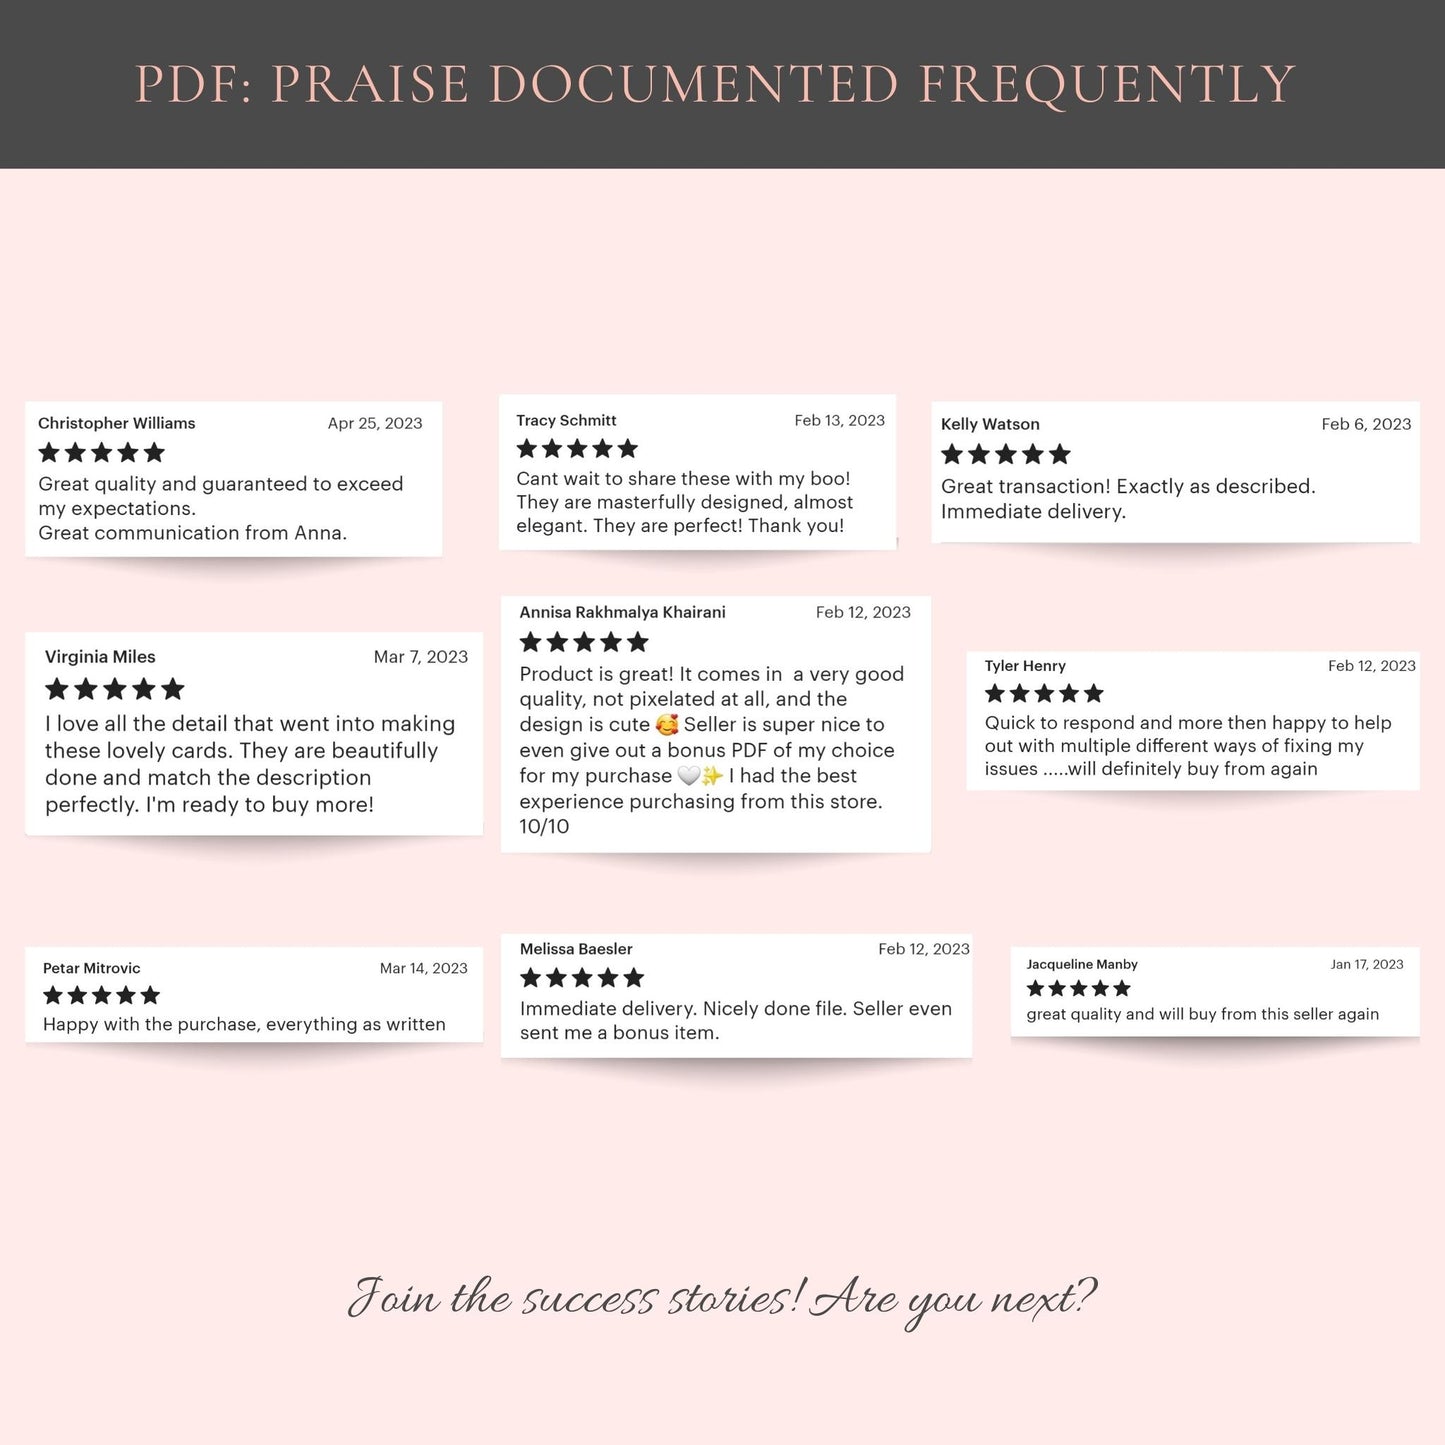 Top center: PDF-Praise Documented Frequently. Nine 5-star reviews from Etsy buyers. Quotes include: Happy with purchase, great quality, will buy again, product is great. Top bottom: Join the success stories! Are you next?